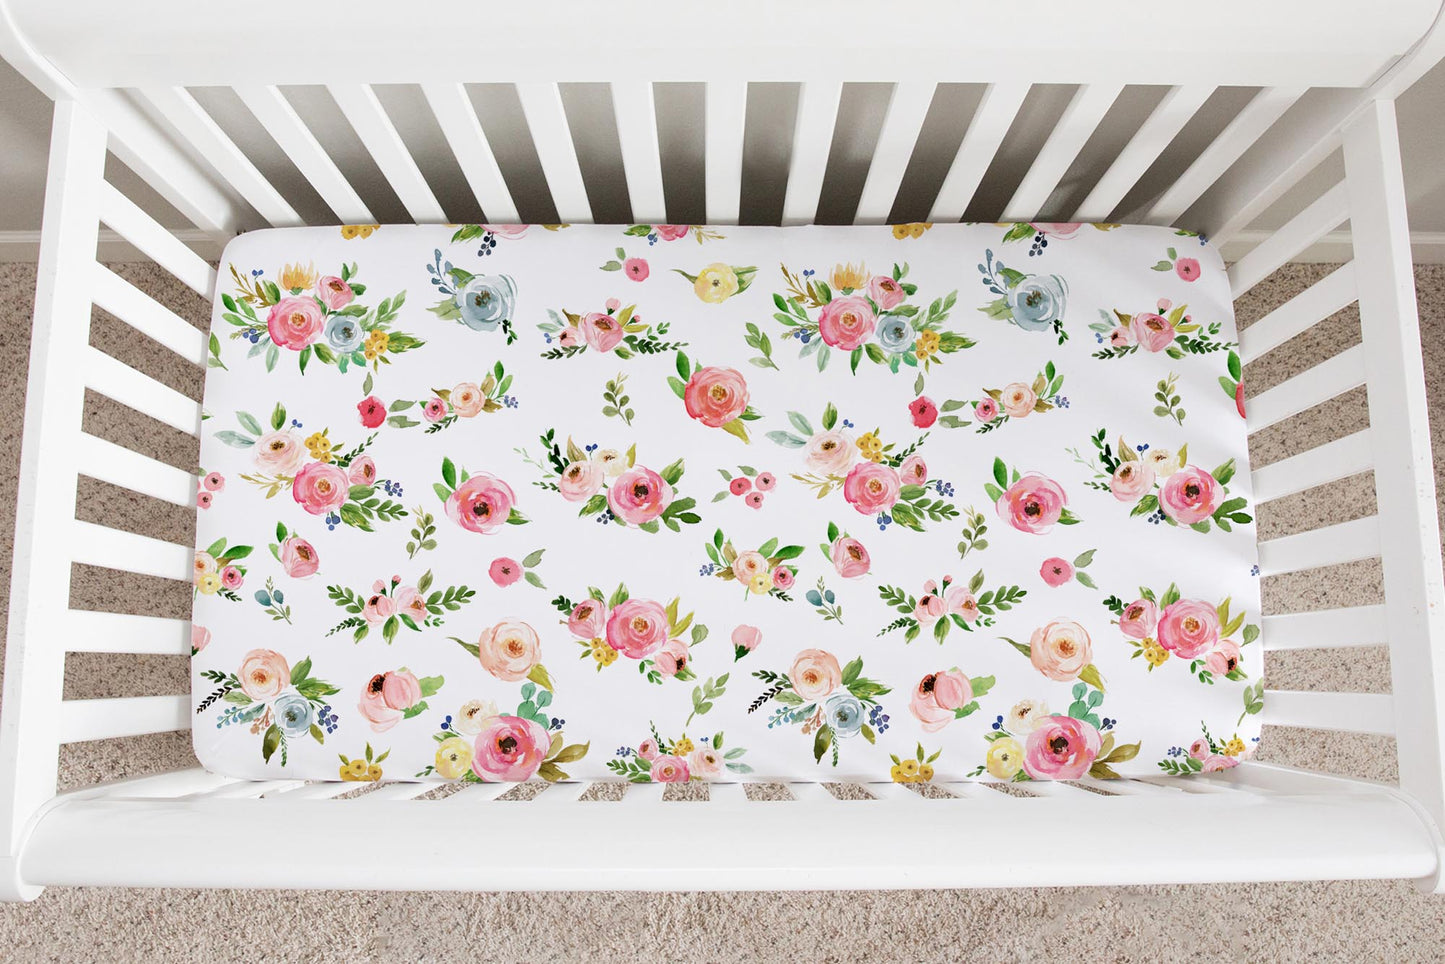 Summer Meadow Patterned Crib Sheet for Girl